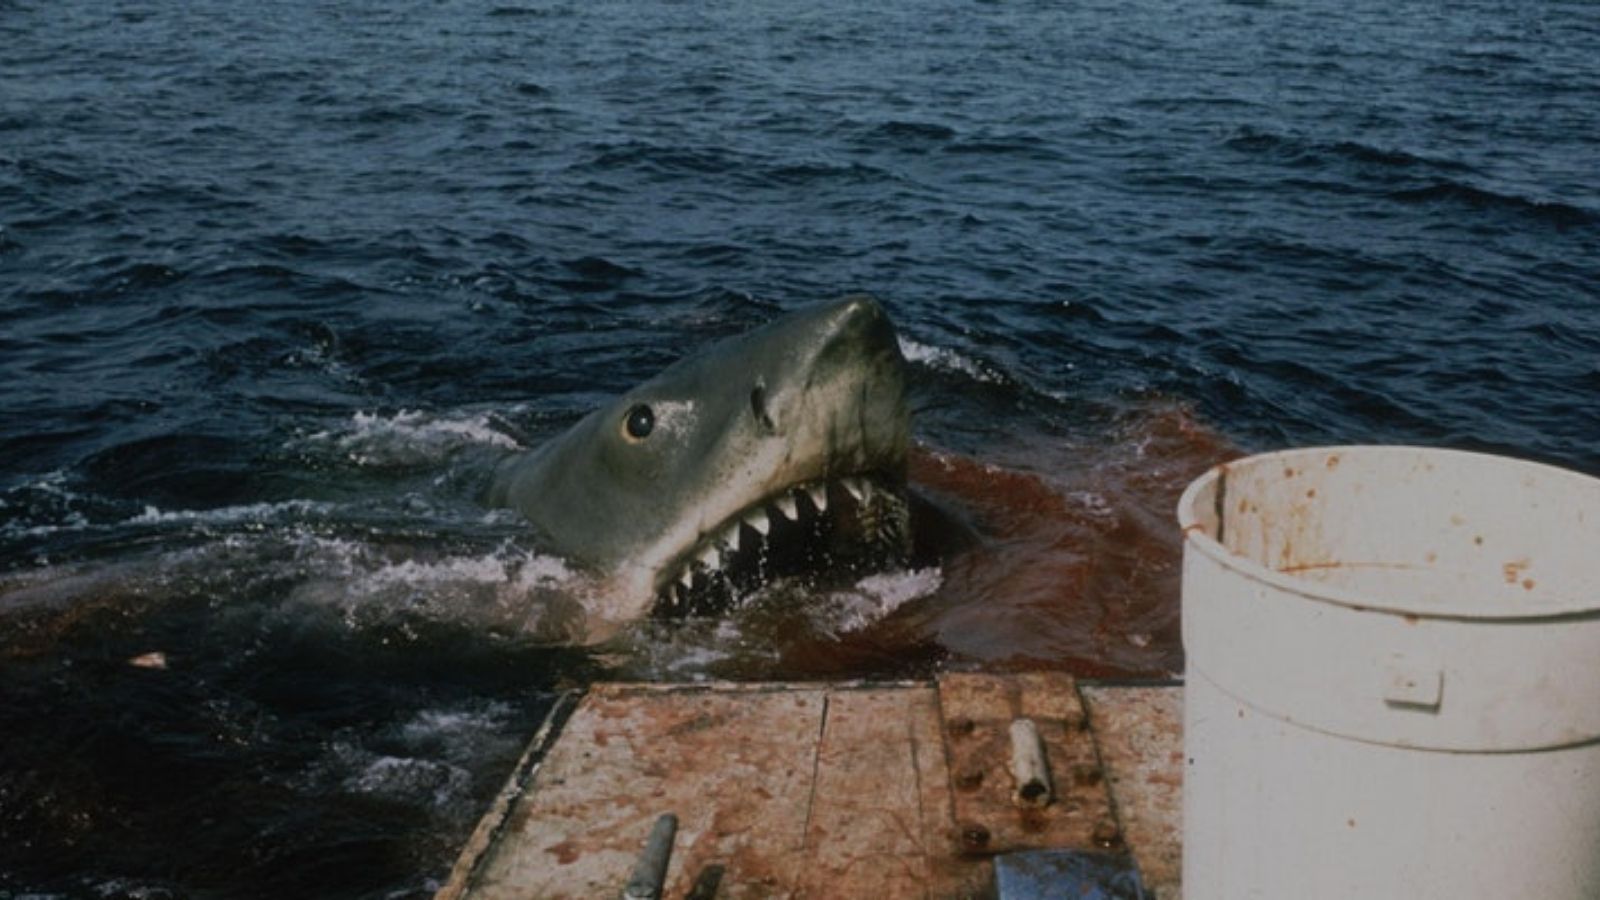 A giant killer shark with blood on its jaws pops out of the water near the side of a boat